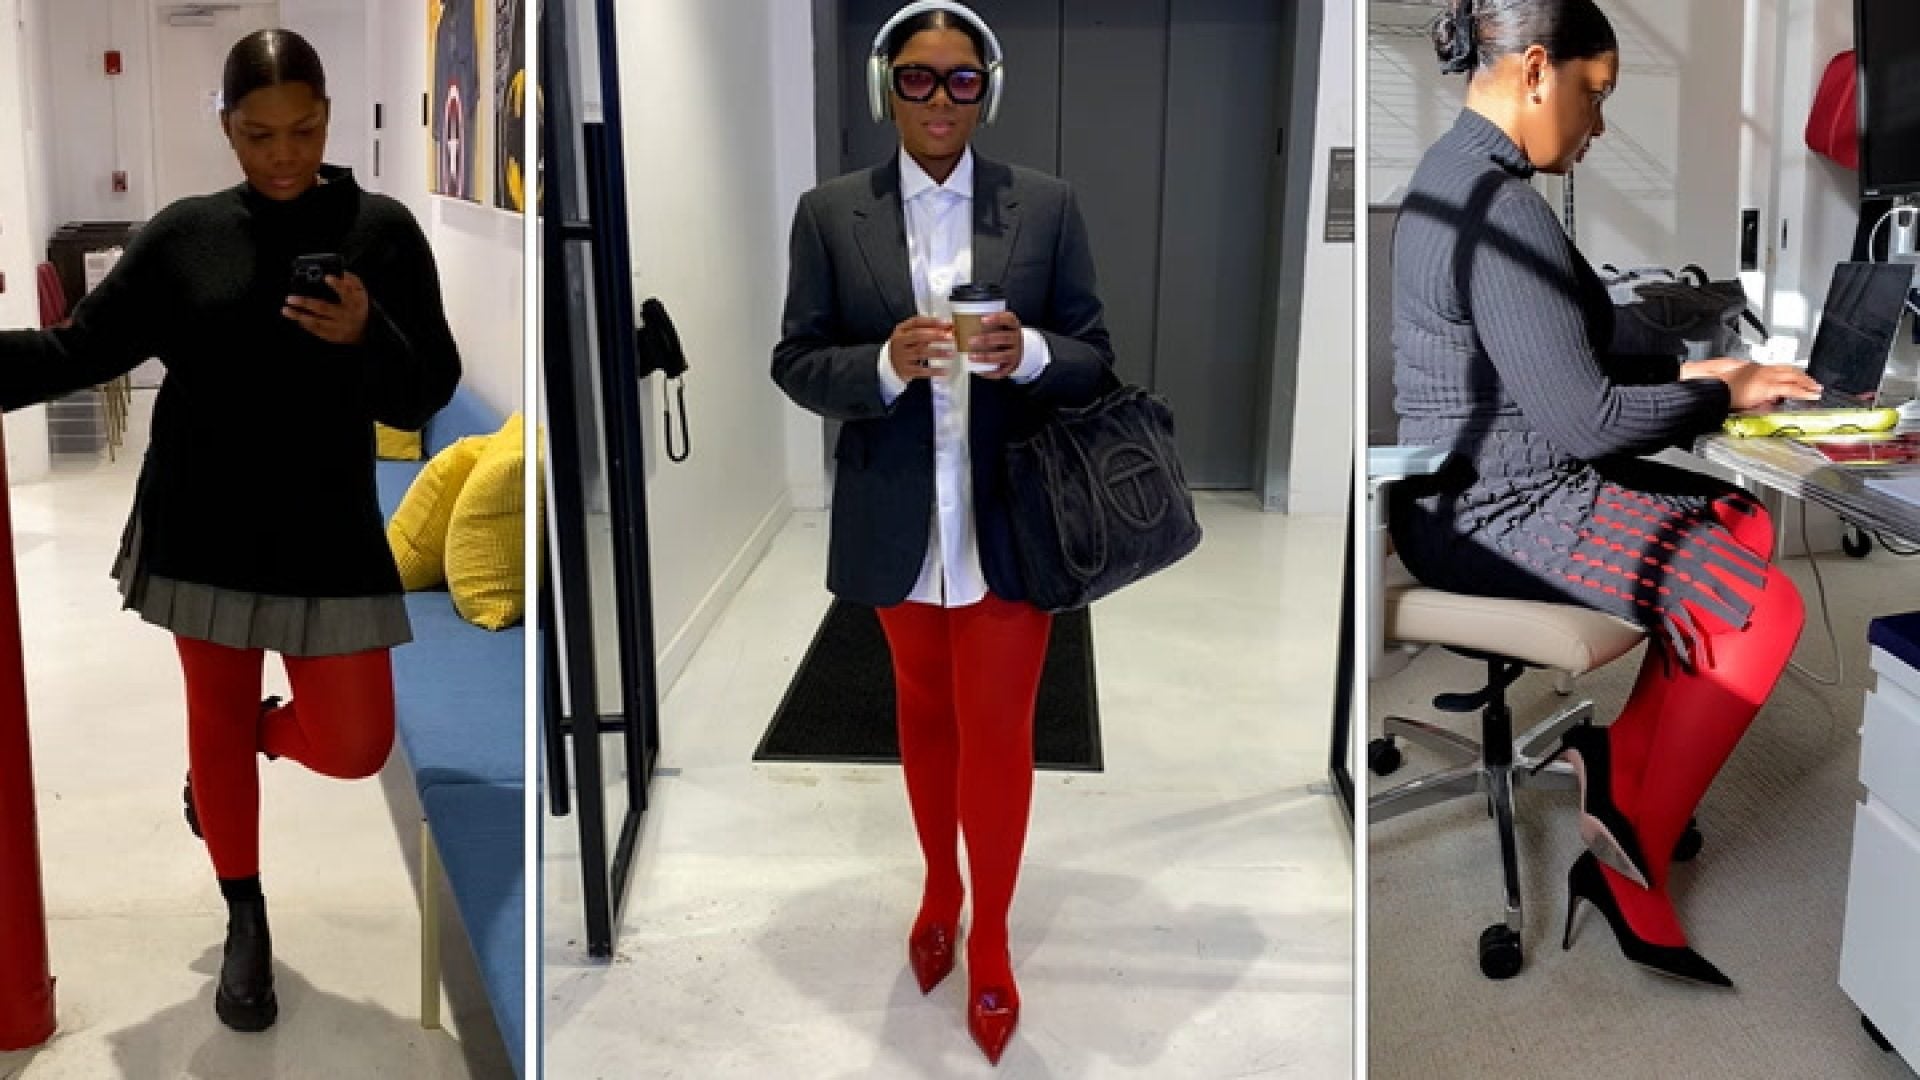 WATCH: I Tried The Red Tights Trend For 24 Hours